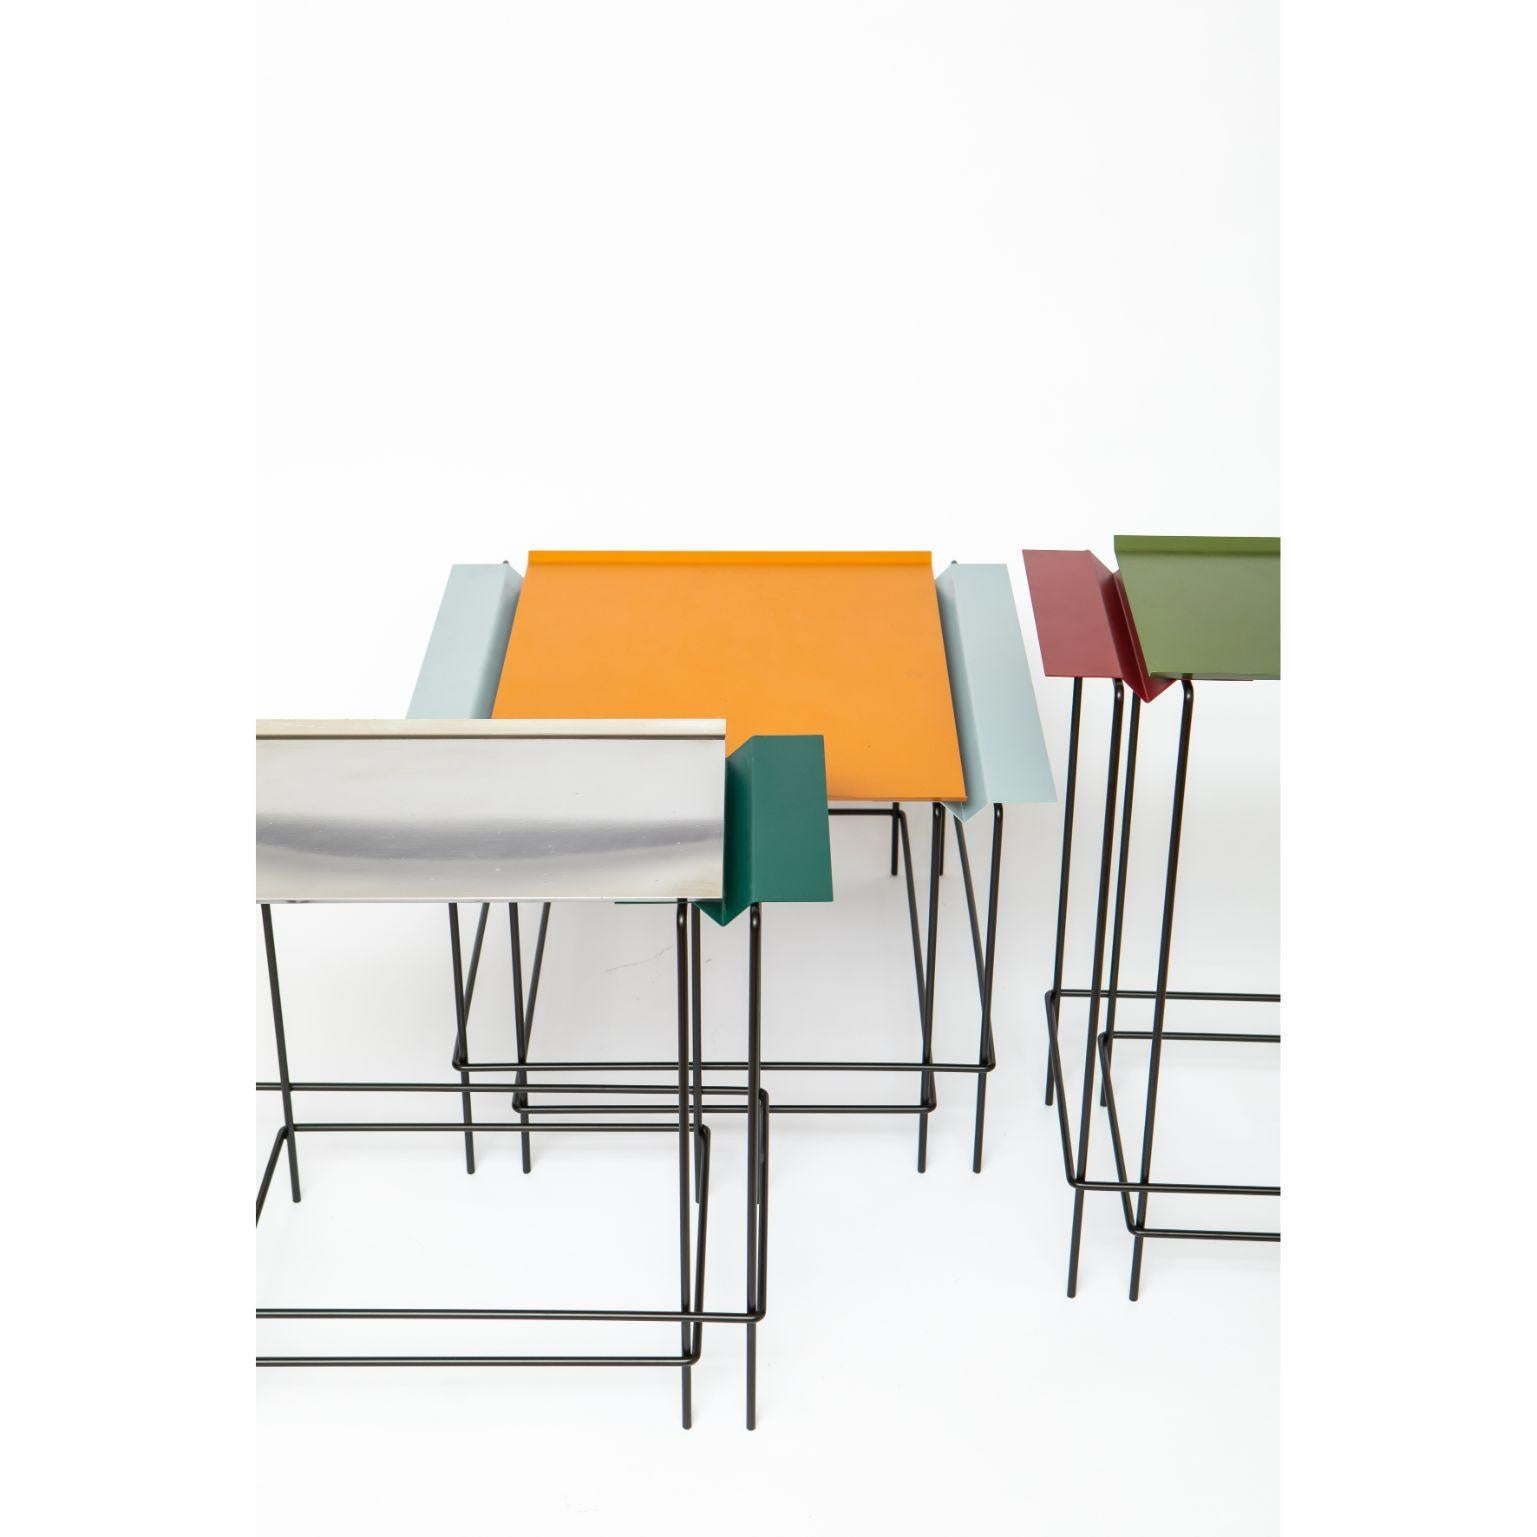 A Set of 3 Leva - tables by Alva Design
Materials: Painted Metal, Stainless Steel
Dimensions: 643 x 60 x 32, 60 x 50 x 32, 60 x 40 x 59 cm

ALVA is a furniture and objects design office, formed by brothers Susana Bastos, artist and designer, and